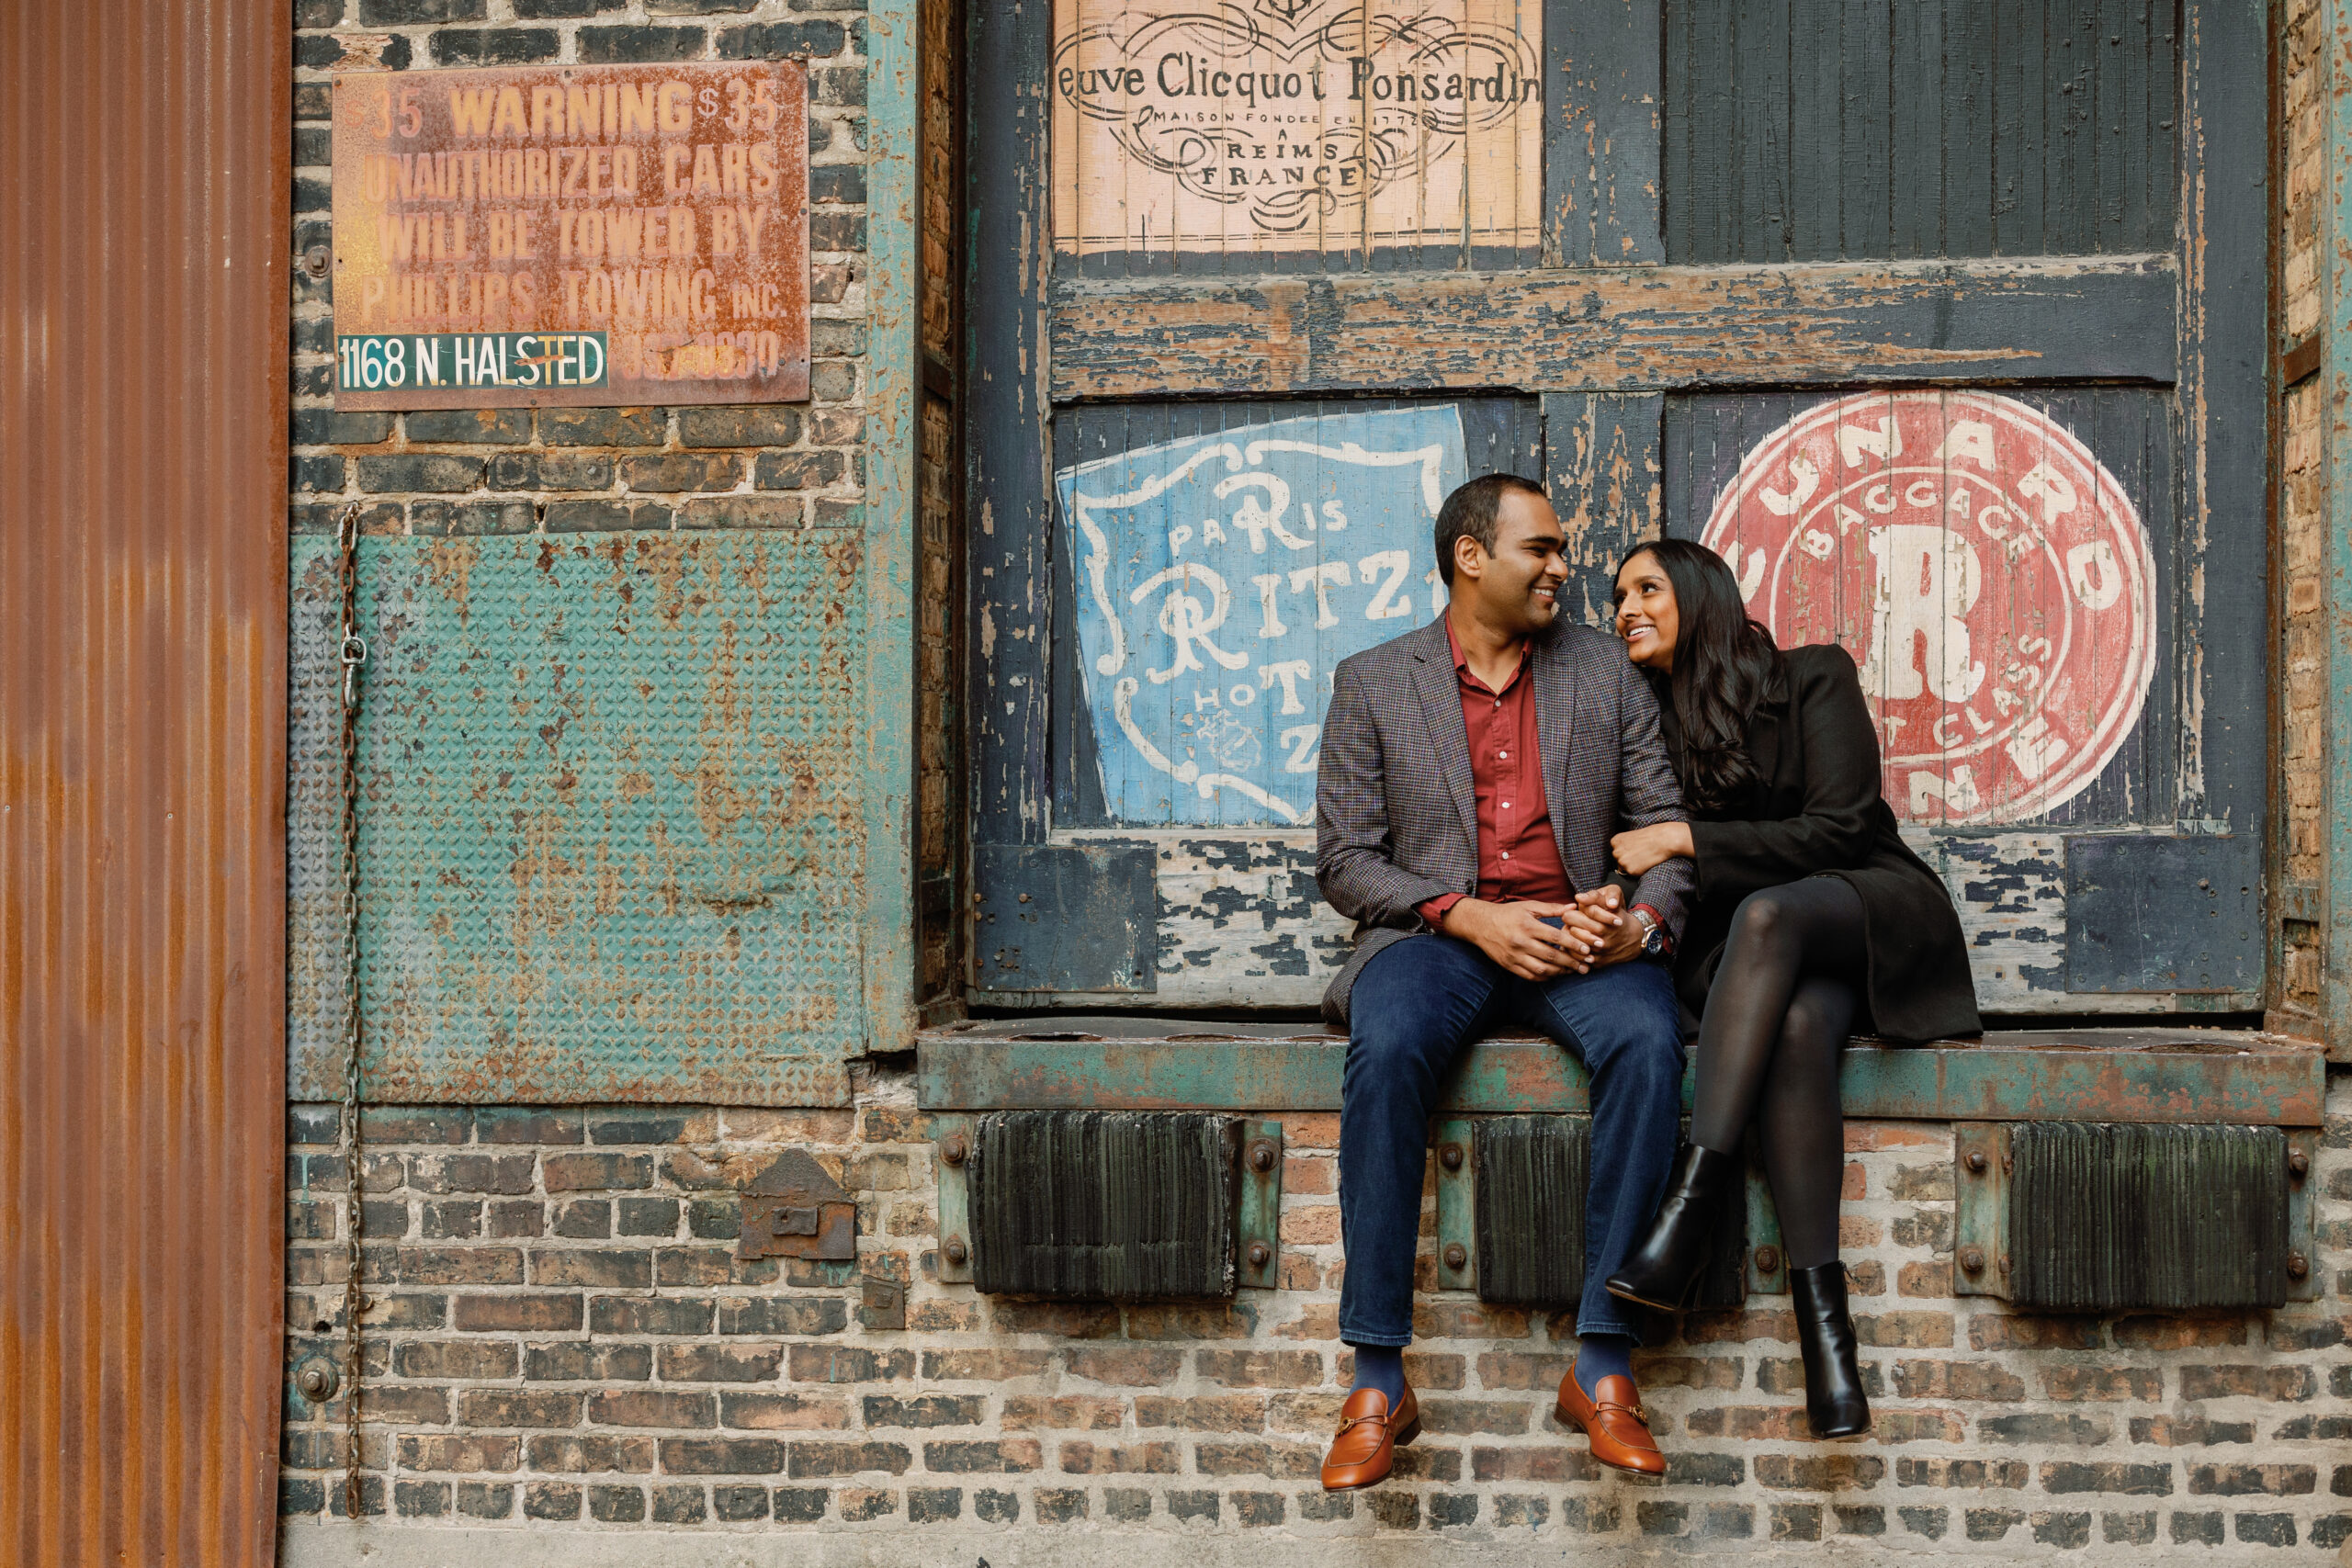 An engagement photo in the West Loop.